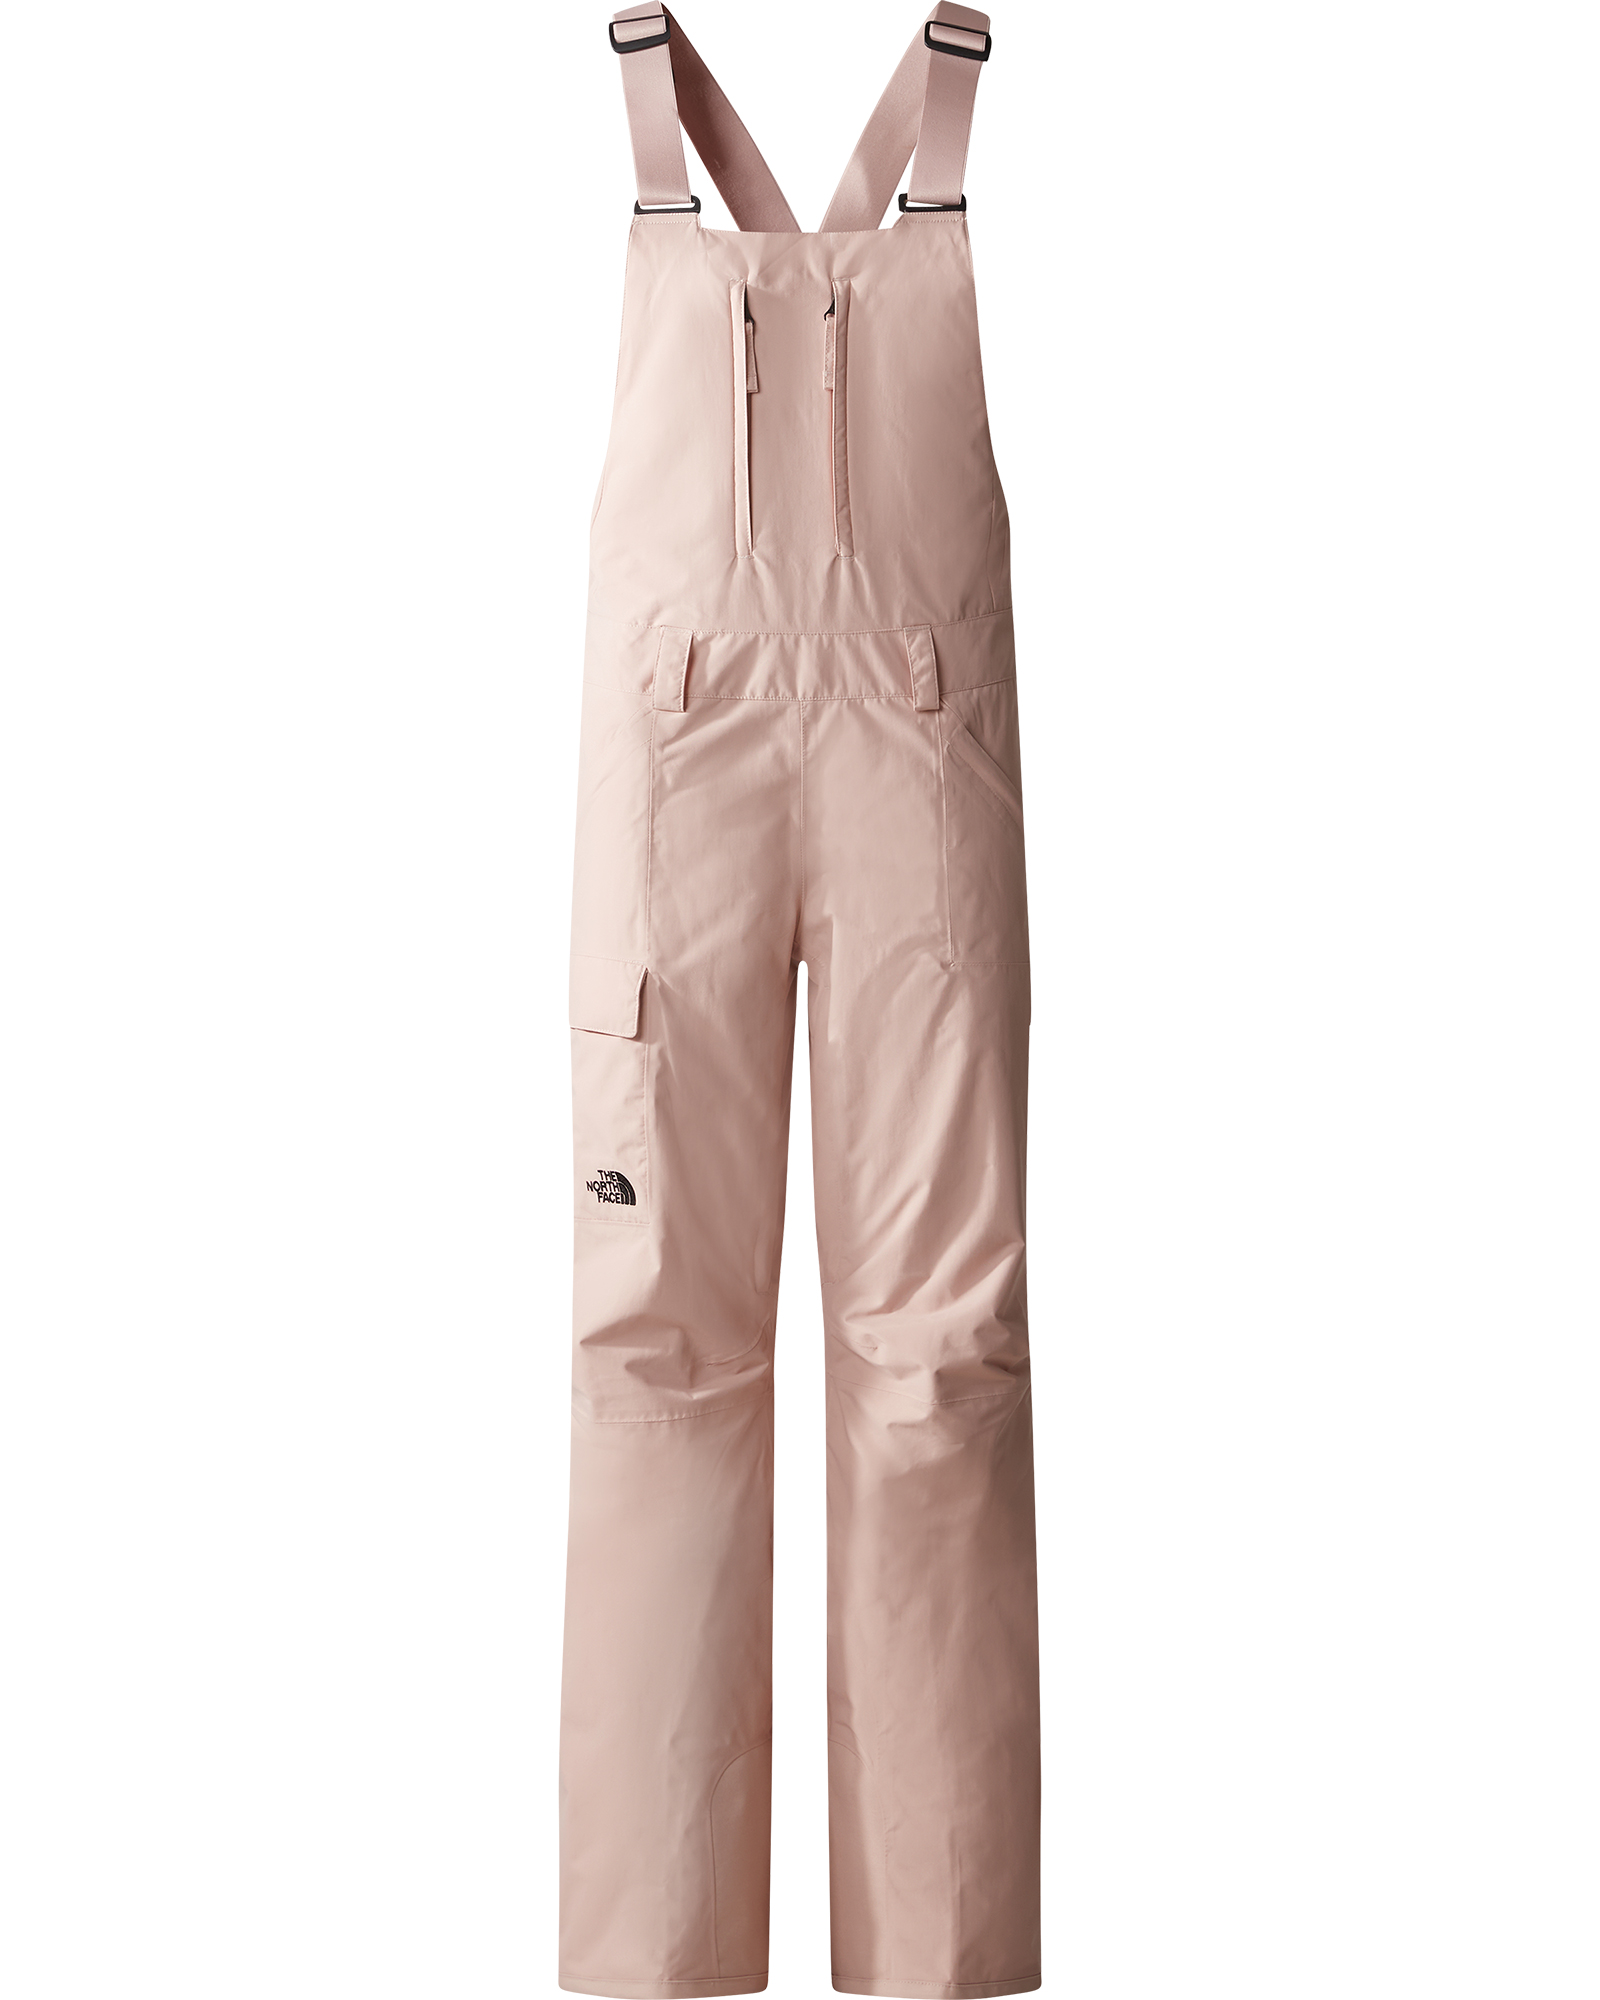 The North Face Freedom Women’s Bib Pants - Pink Moss S